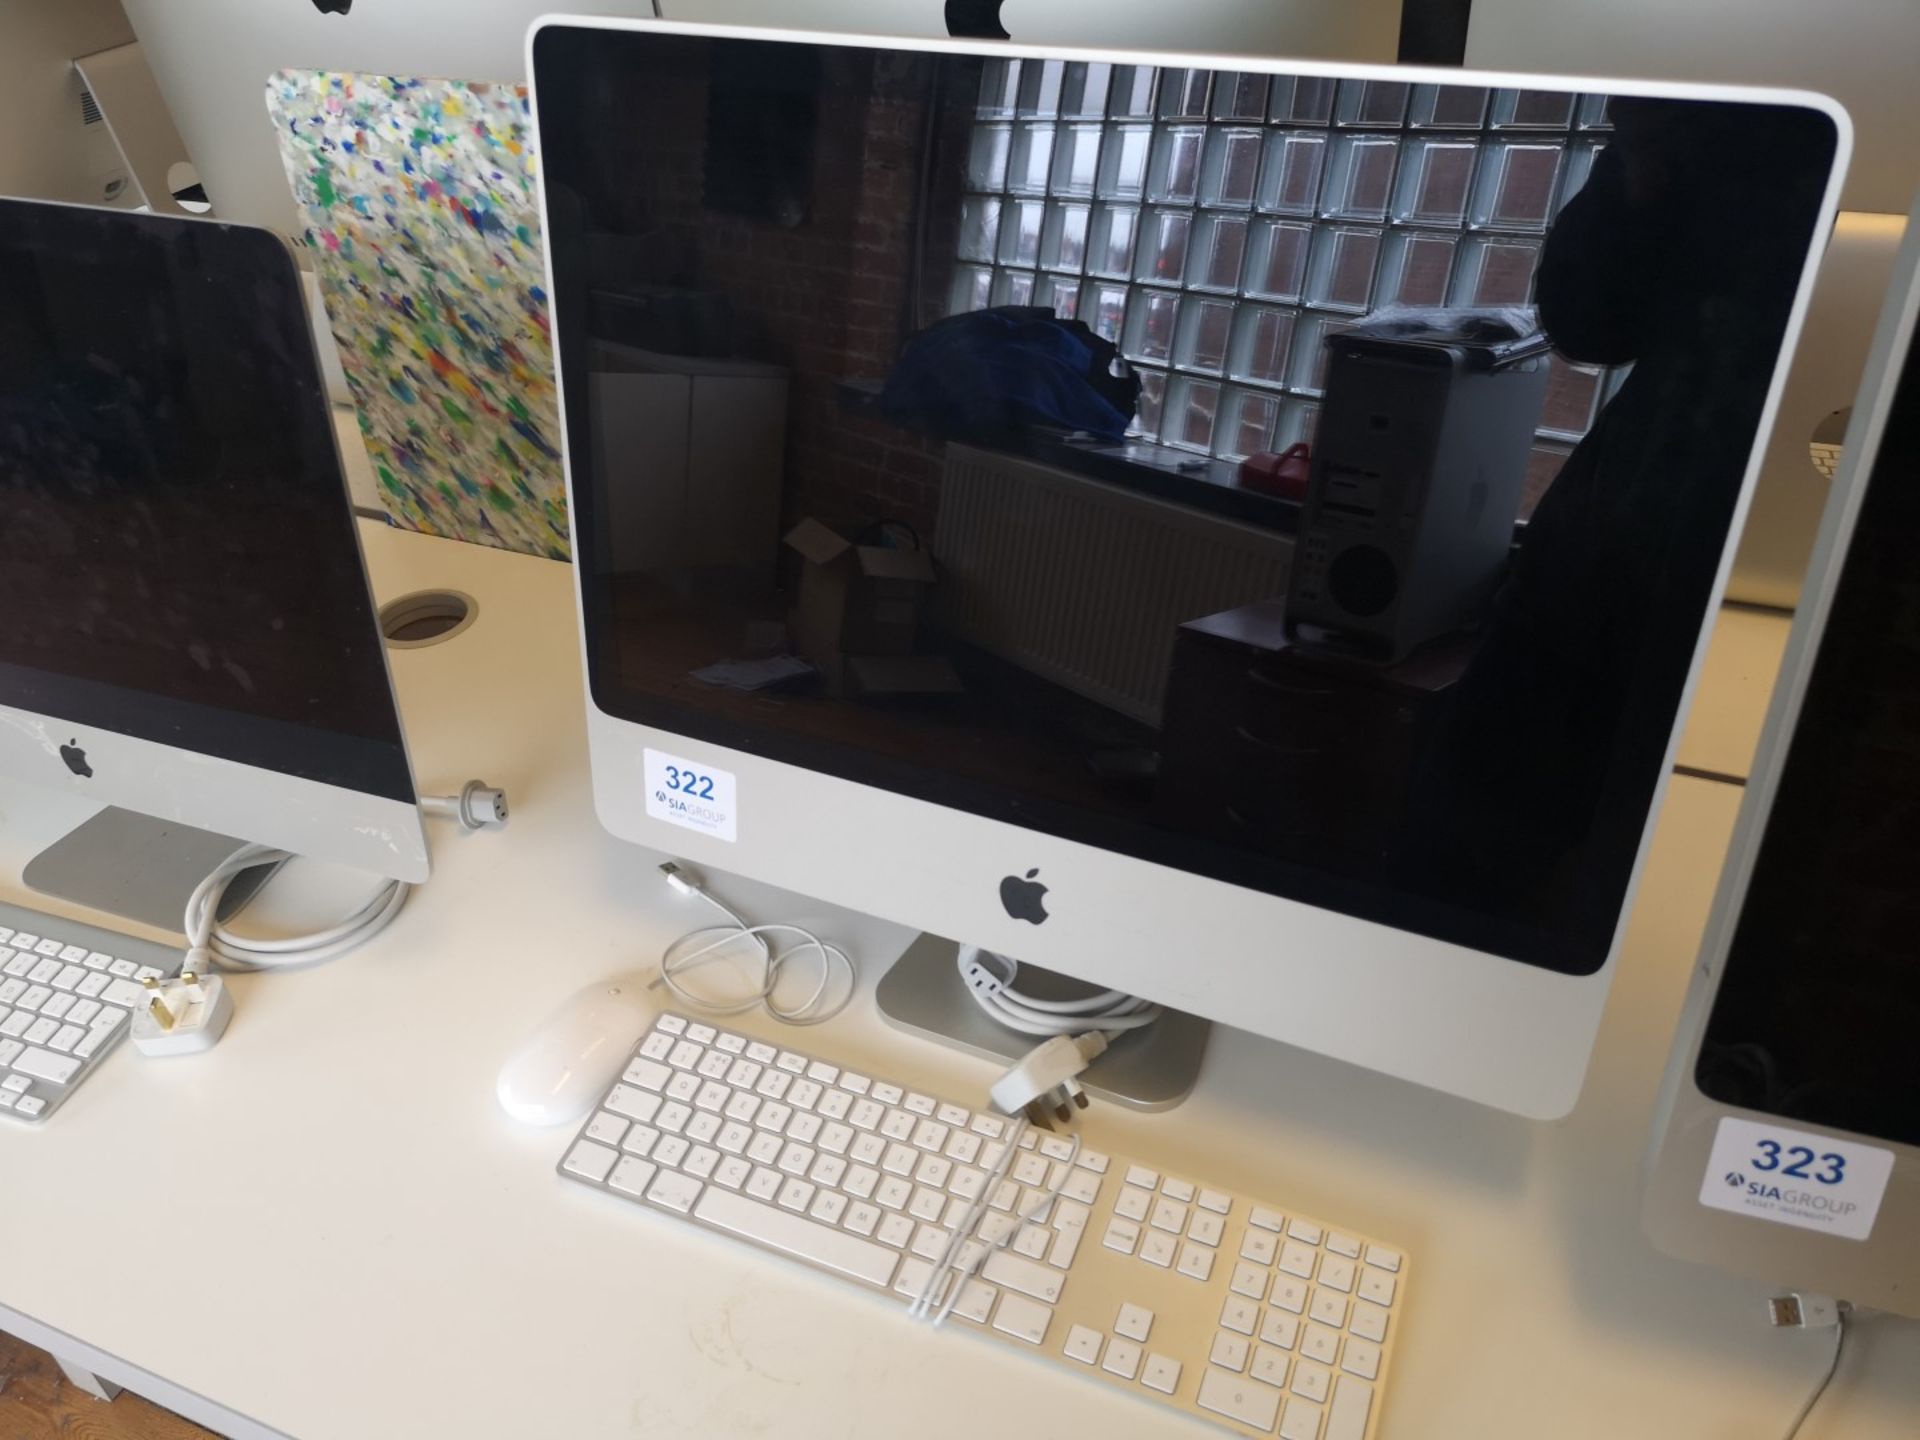 Apple iMac "Core 2 Duo" 2.8 24-Inch (Early 2008) - Image 2 of 2